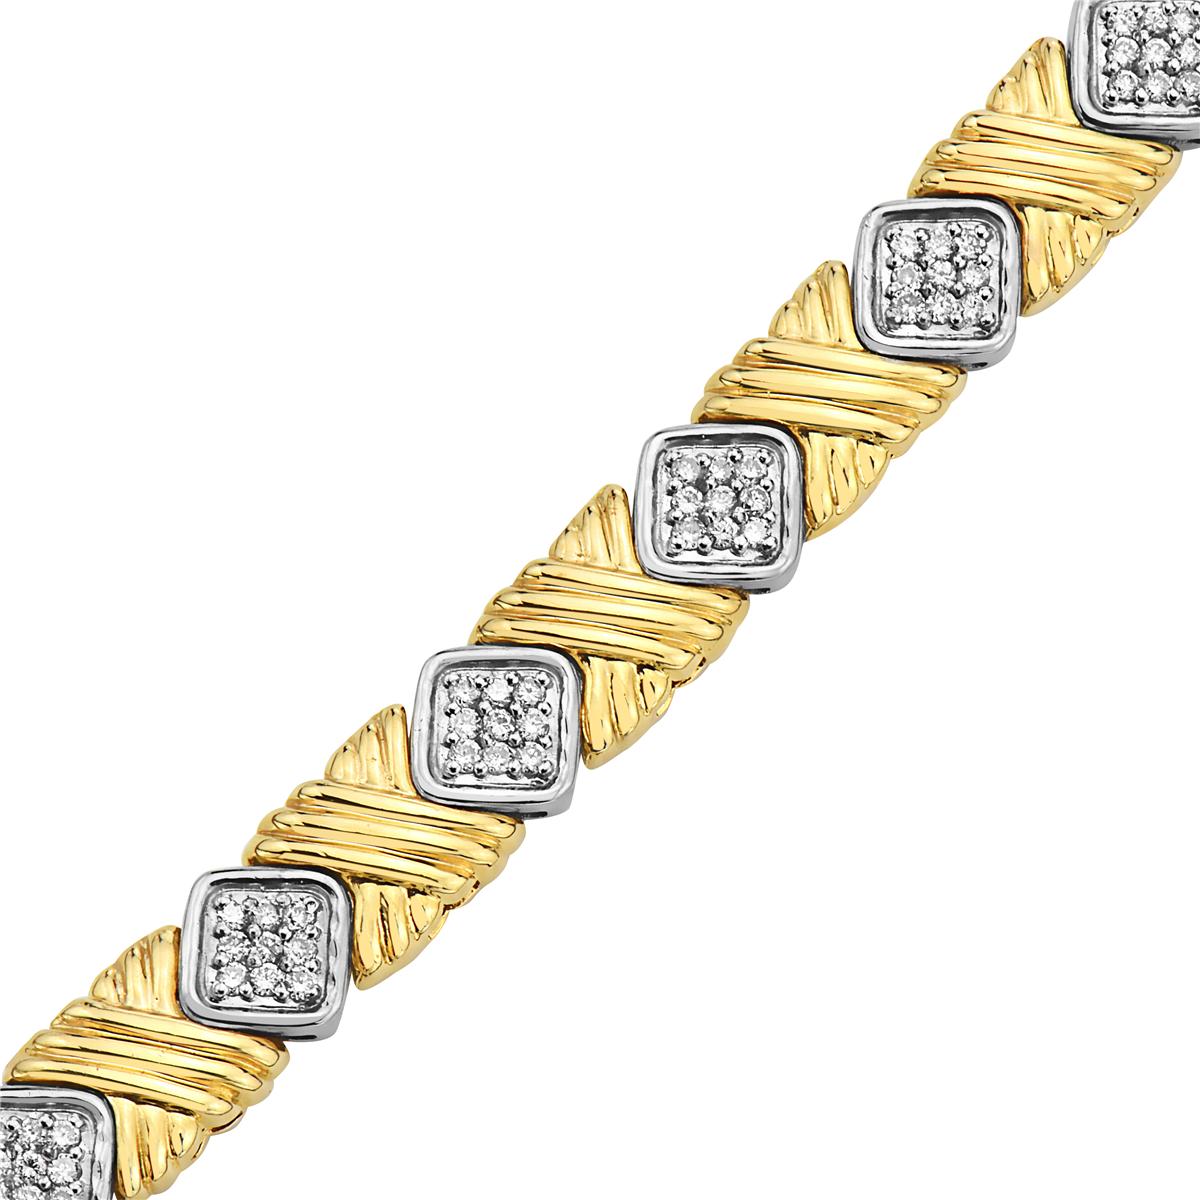 This bracelet features 1.08 carats of diamonds set in 14K yellow gold. 7 inch length. 27 grams total weight.

Resizeable upon request.

Viewings available in our NYC showroom by appointment.